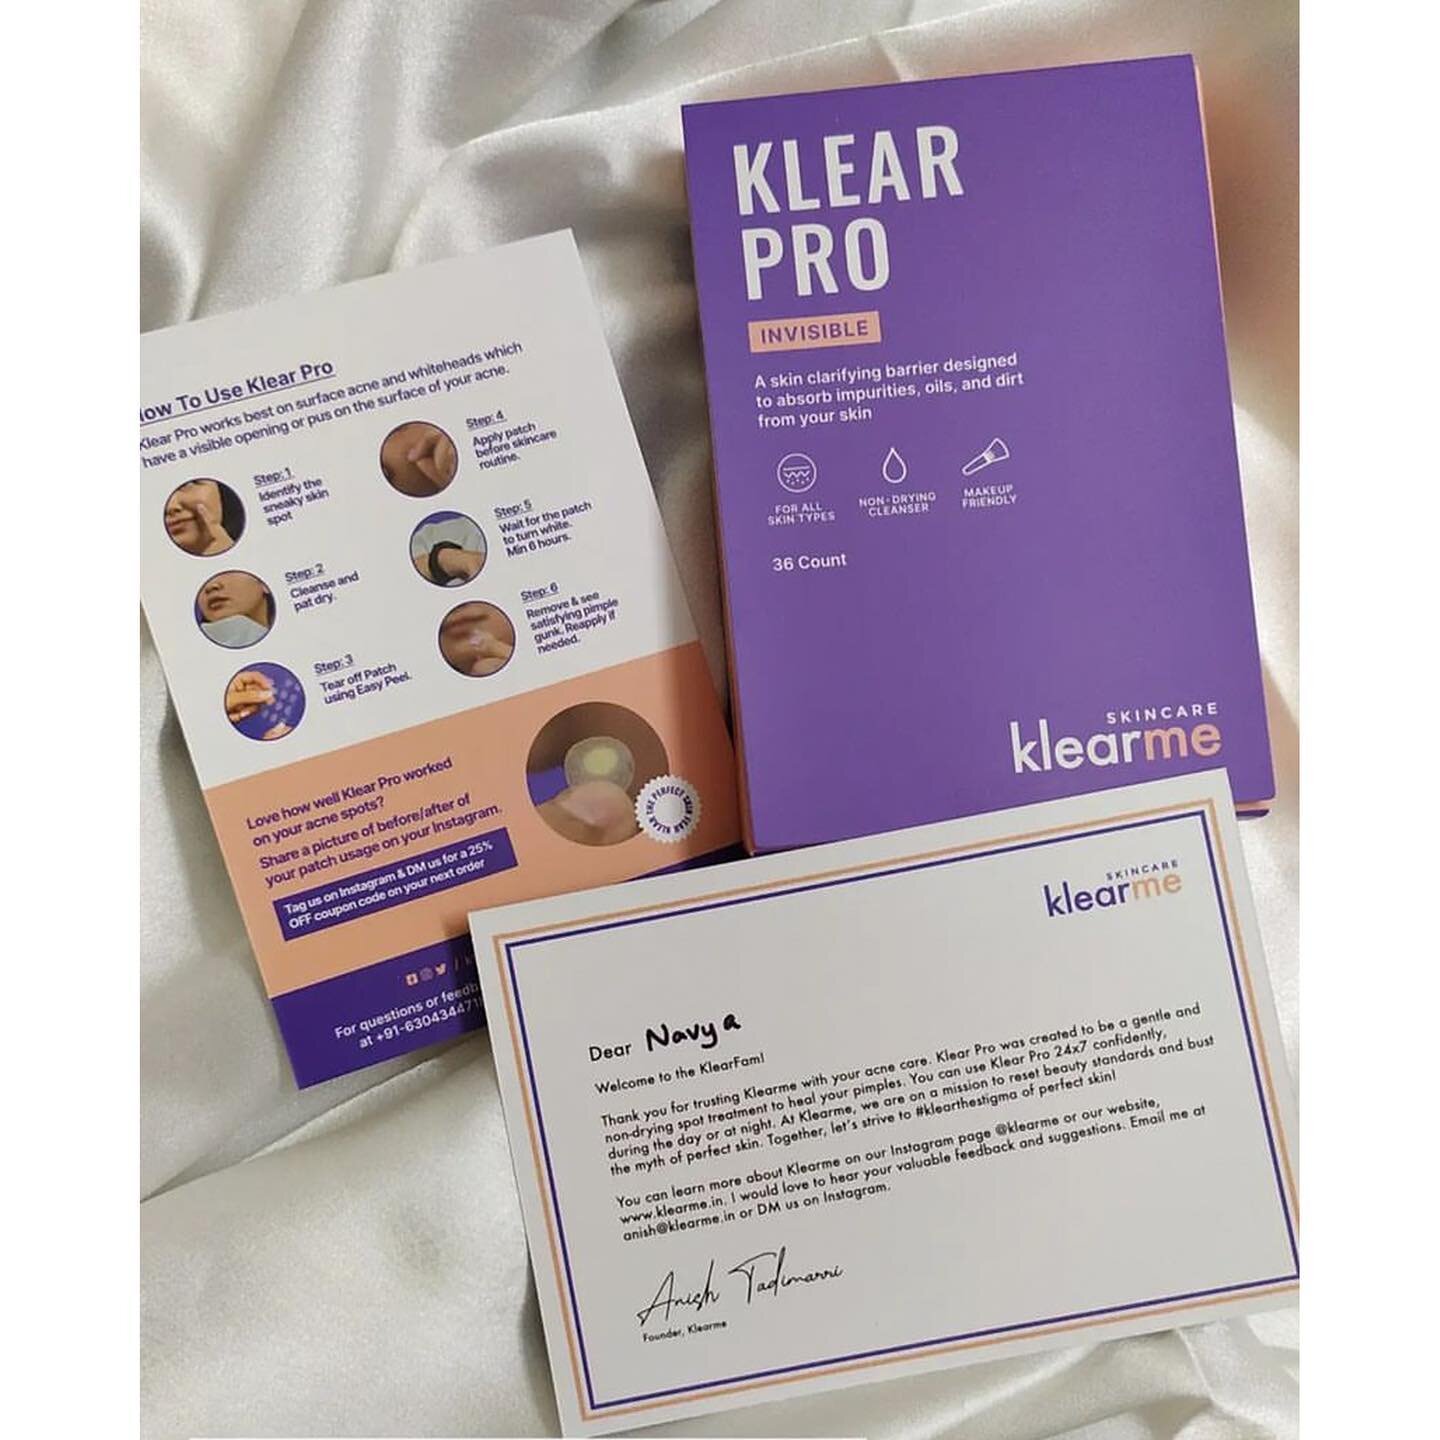 Got my hands on these images for my work on @klearme acne patches! ⚡️
&bull;
&bull;
We worked with Klearme to build an acne-positive, high efficacy brand for acne-prone skin.
&bull;
&bull;
&bull;
#branding #packaging #design #brandstrategy #packaging